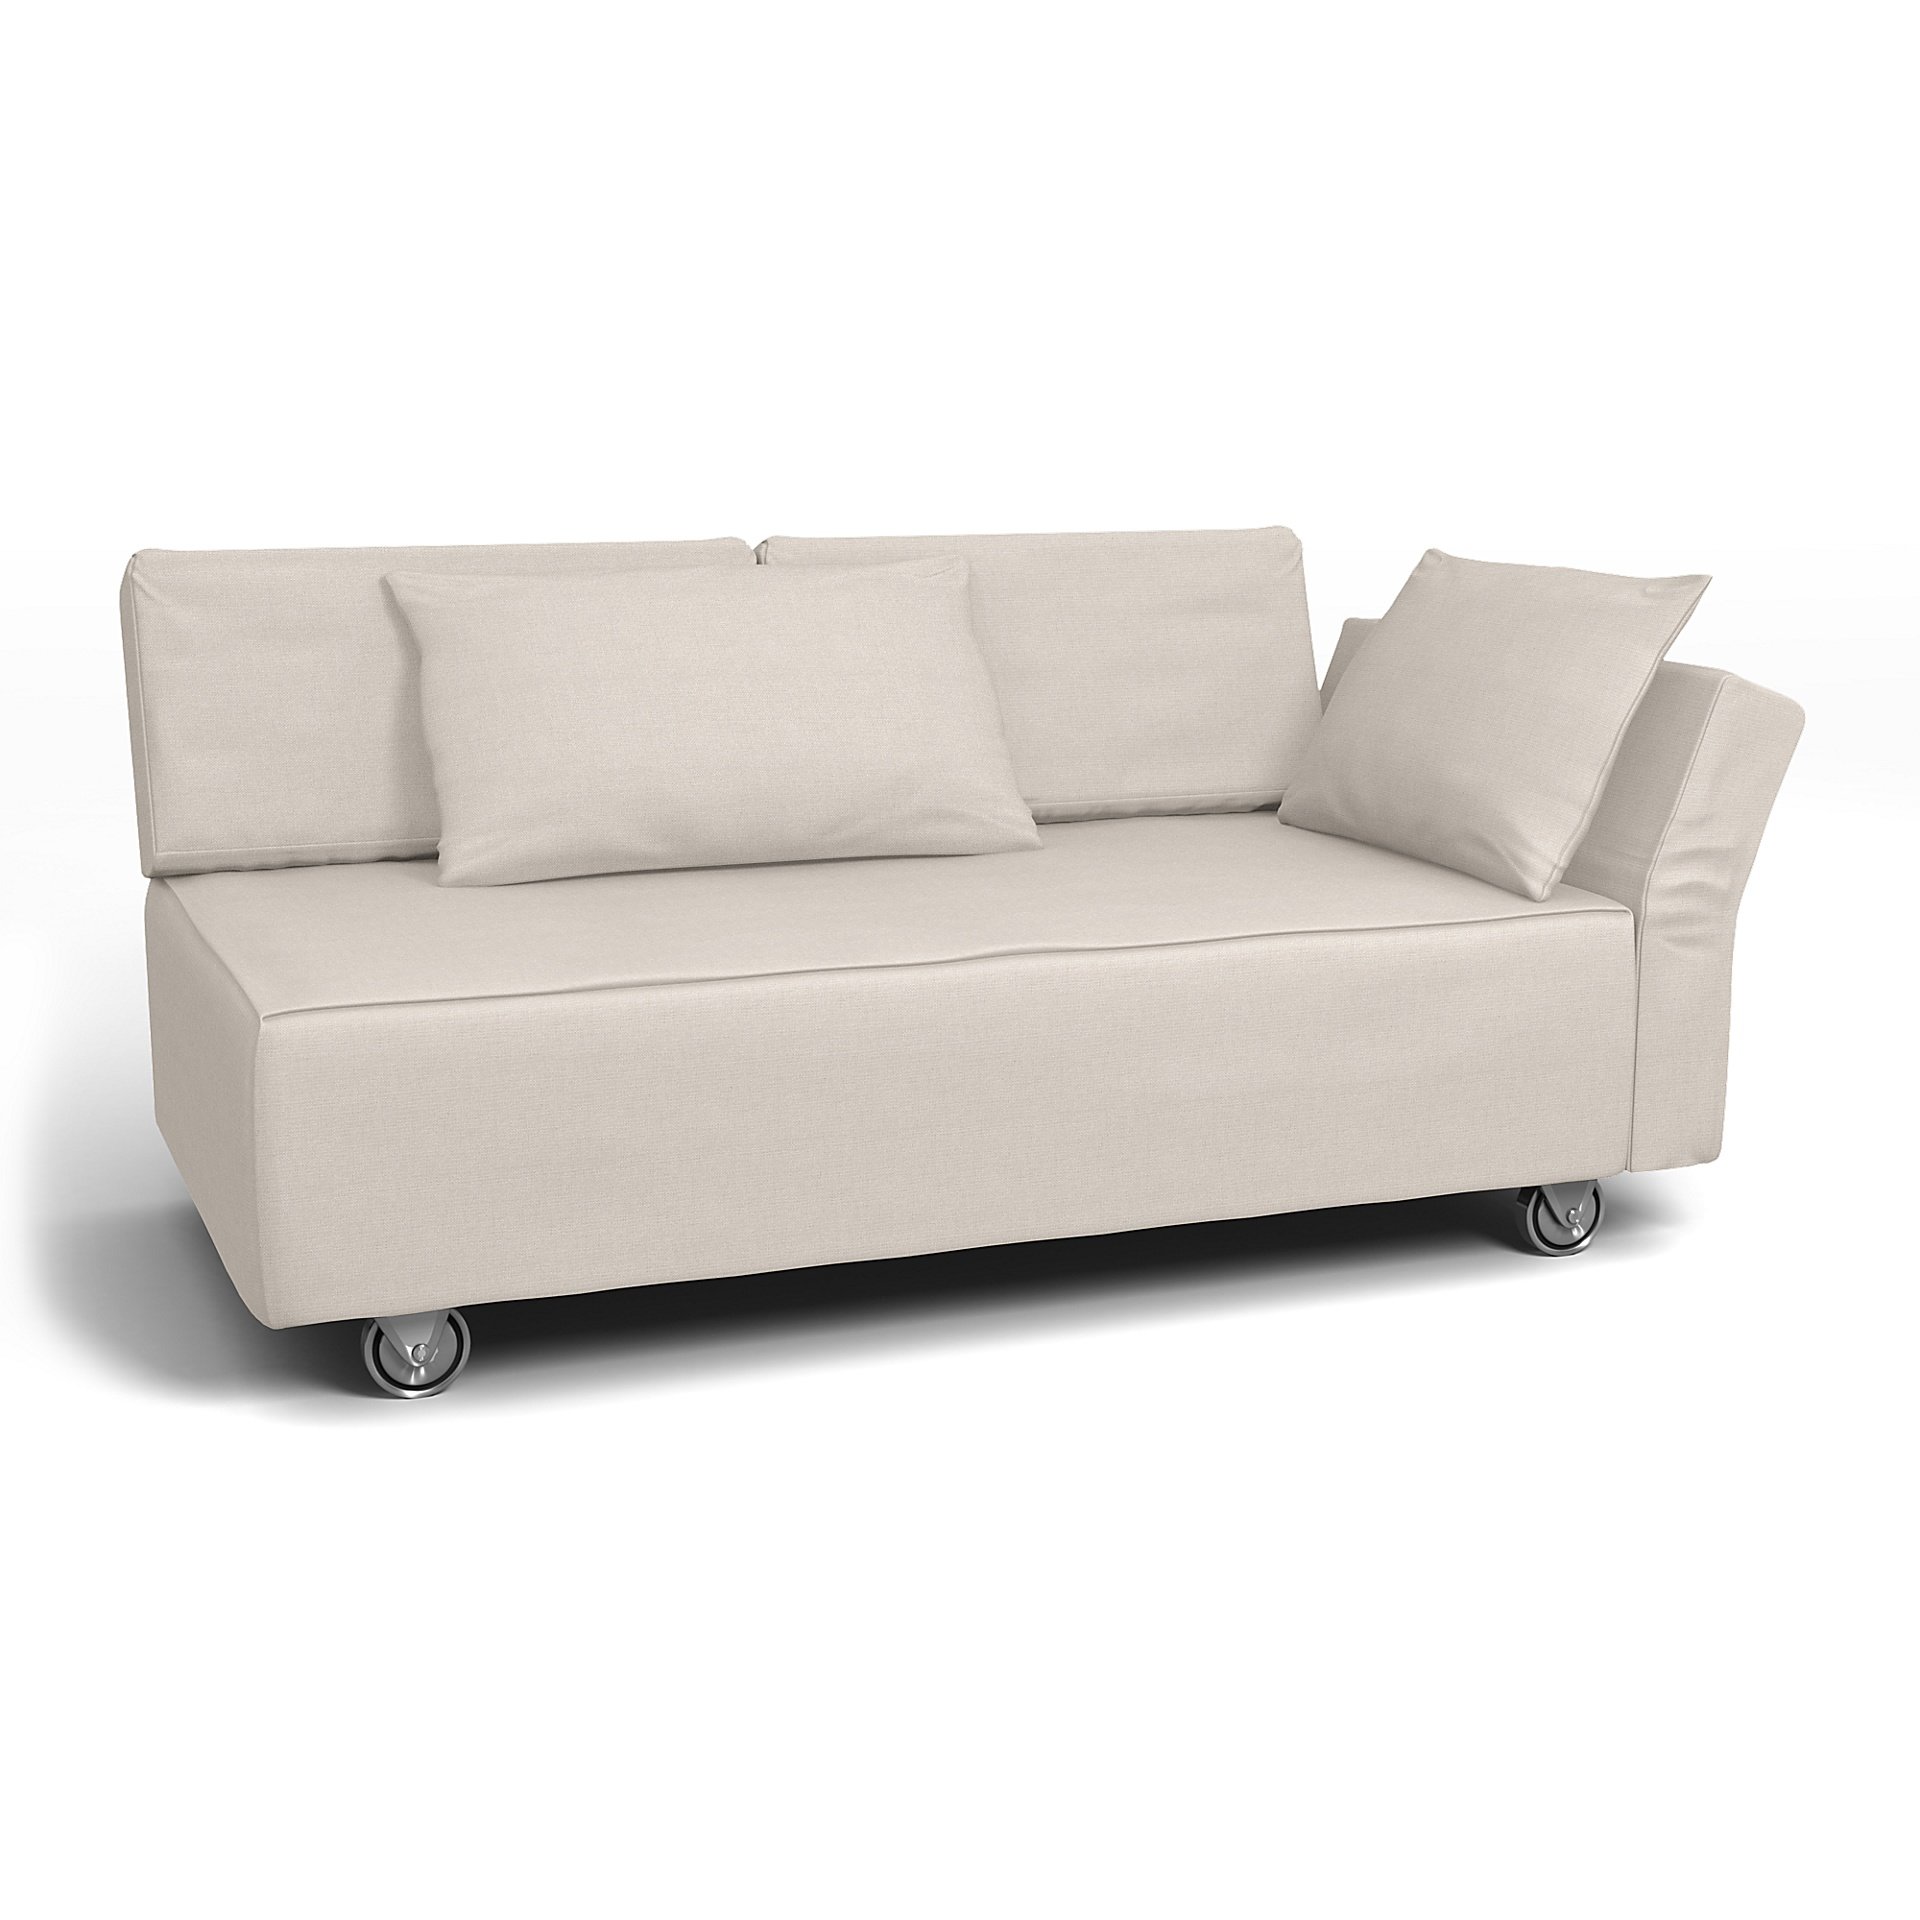 IKEA - Falsterbo 2 Seat Sofa with Right Arm Cover, Chalk, Linen - Bemz